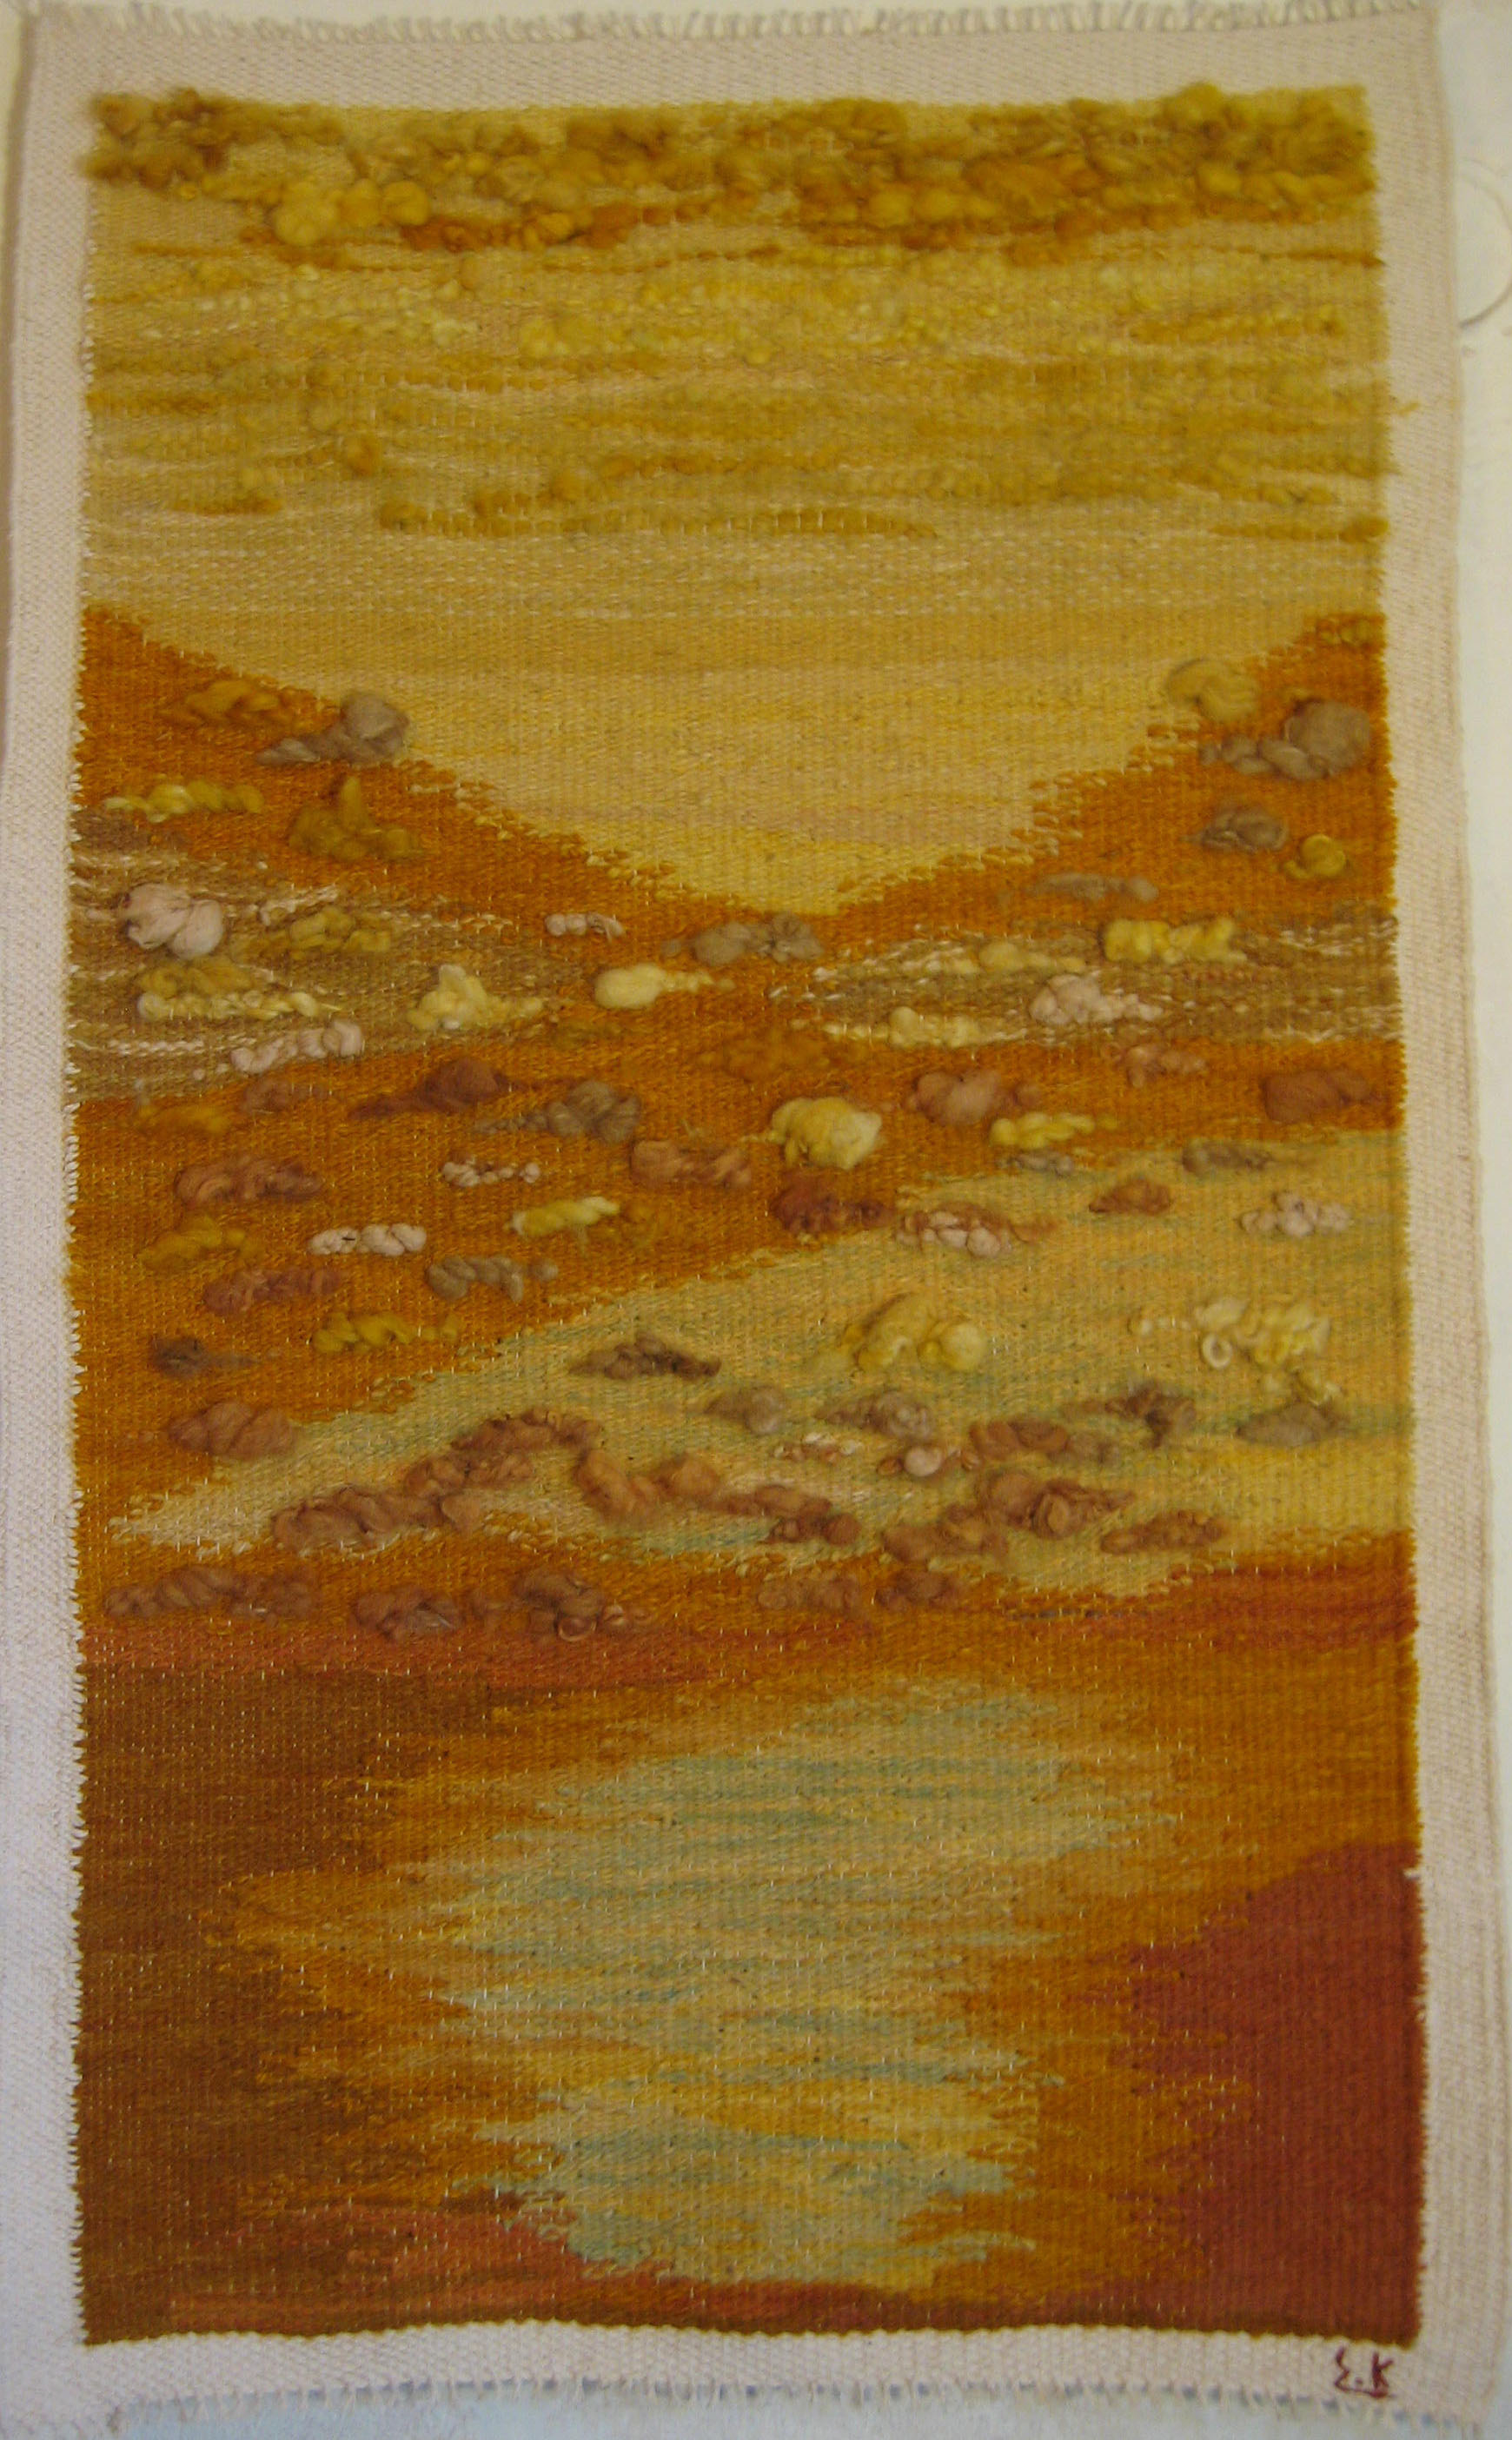 Tapestry from natural golden marguerite and spartium dyes